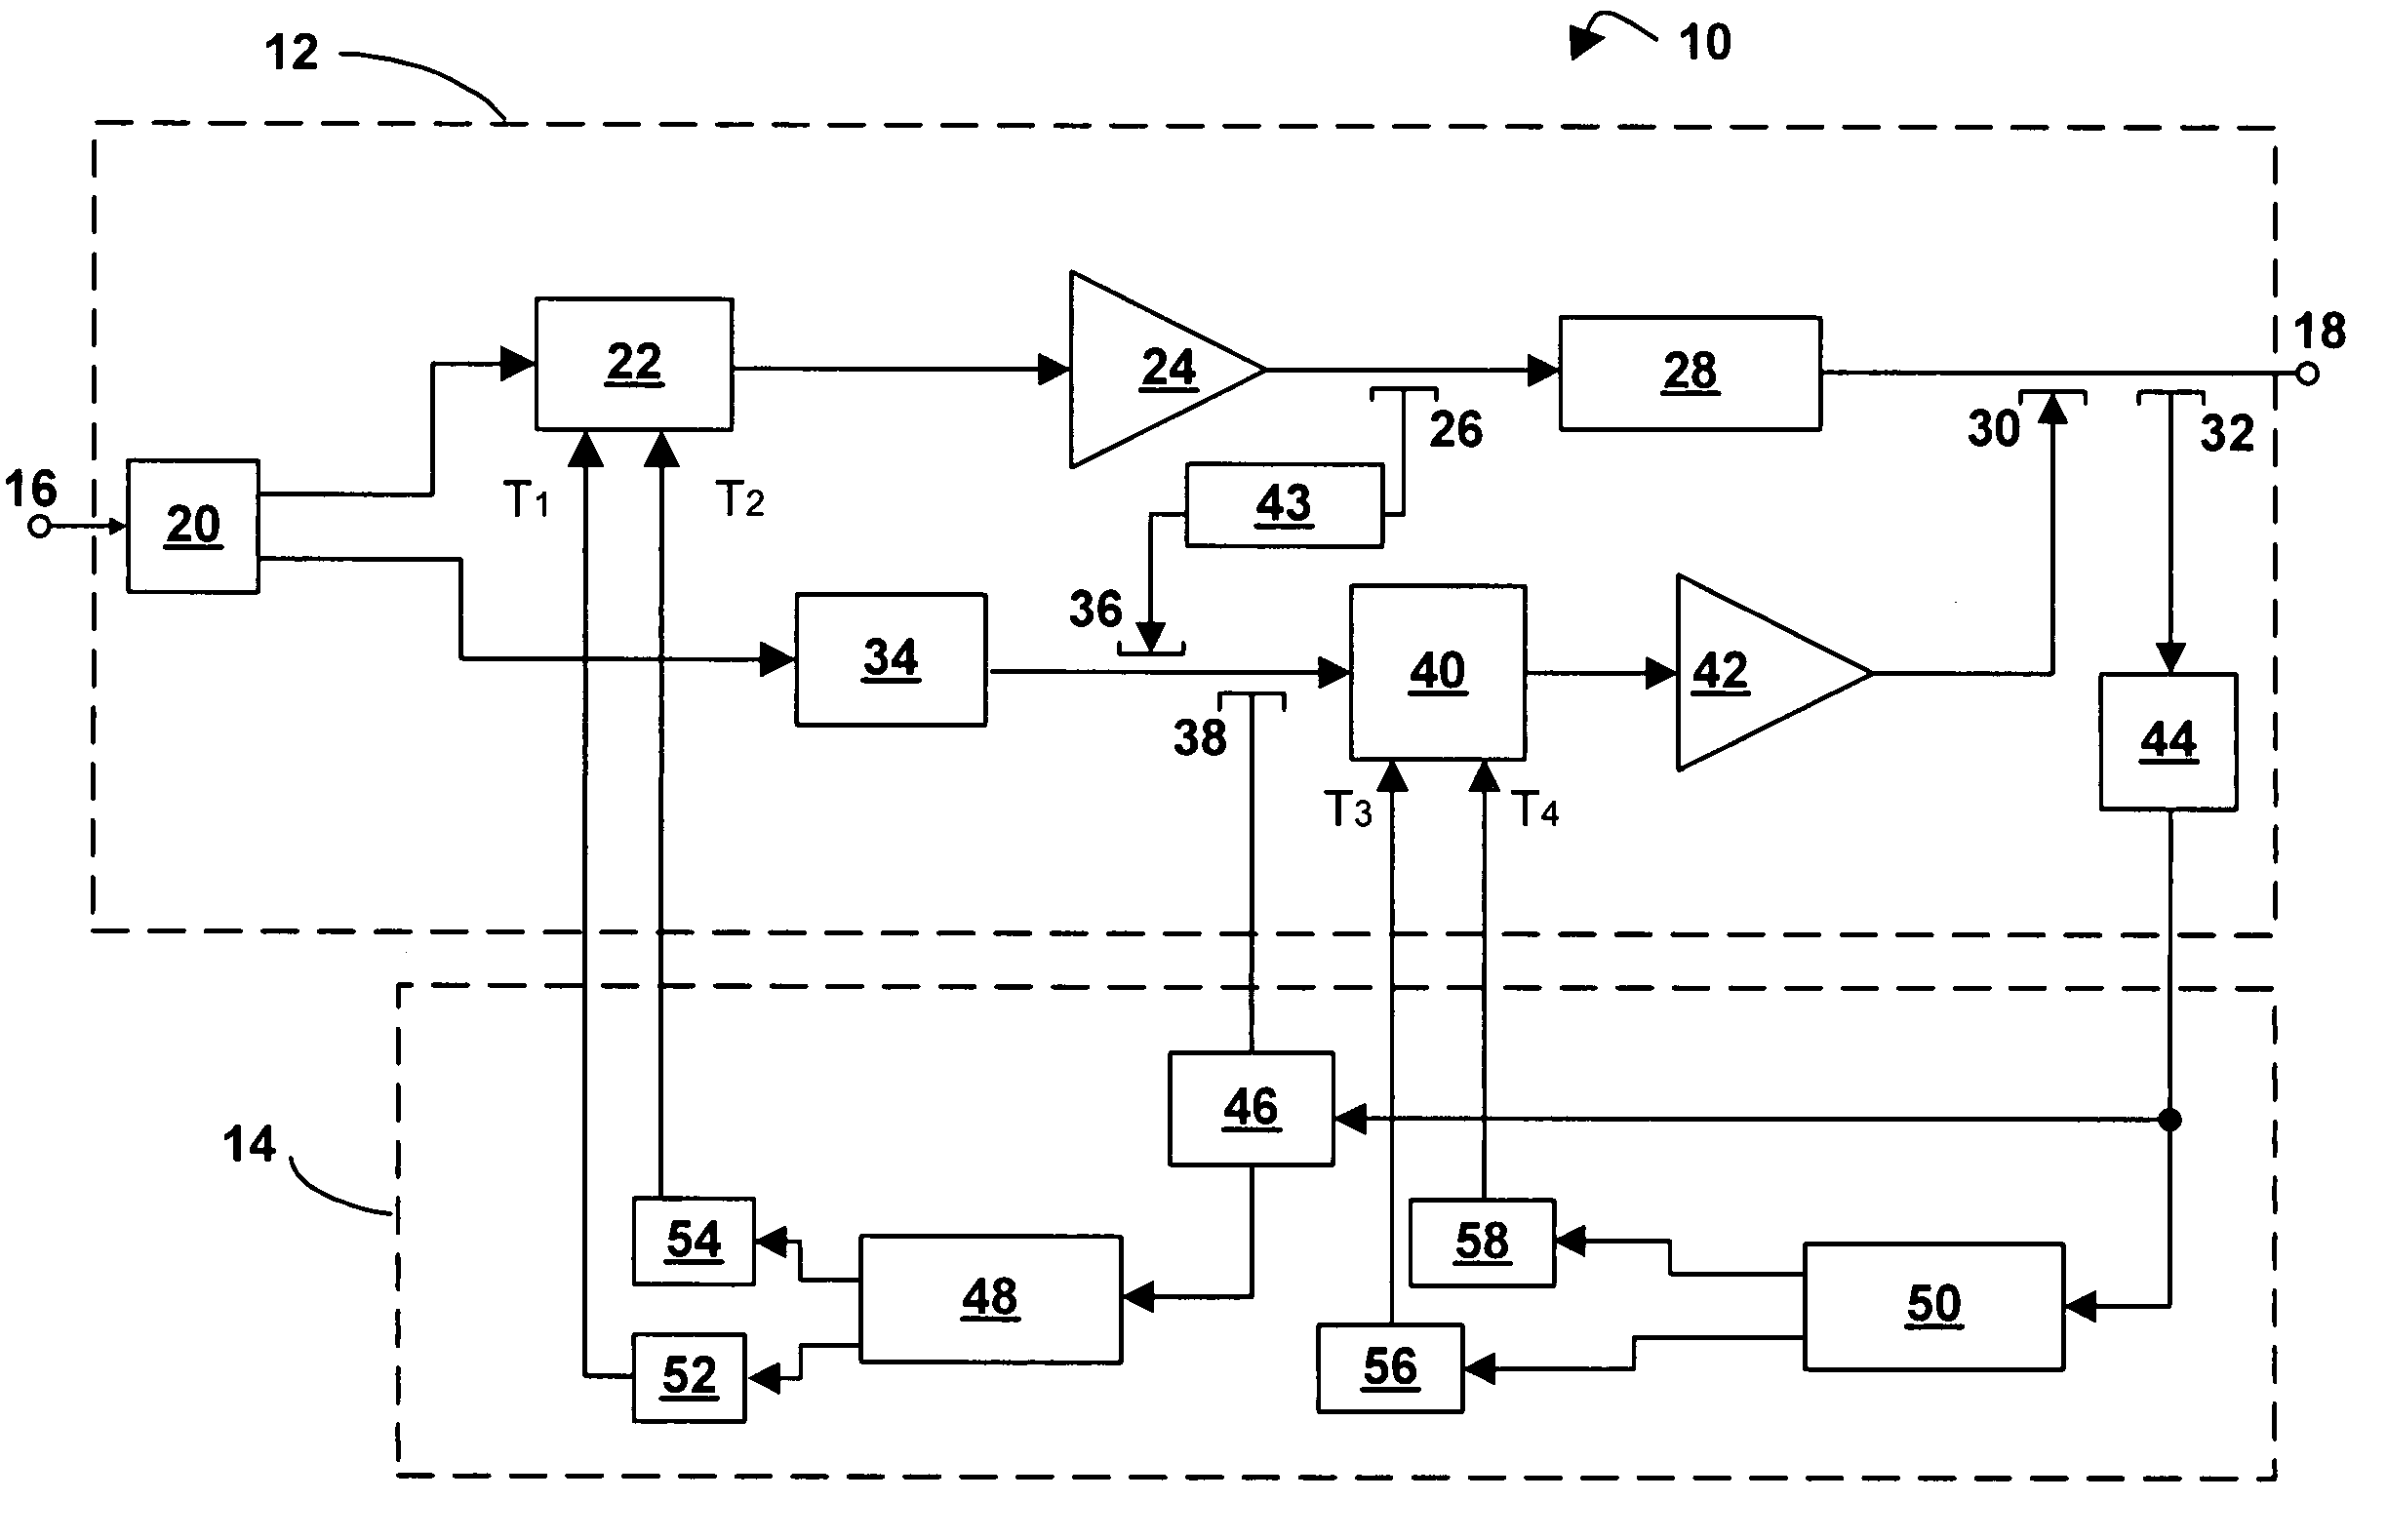 Apparatus and method for controlling feed-forward amplifiers